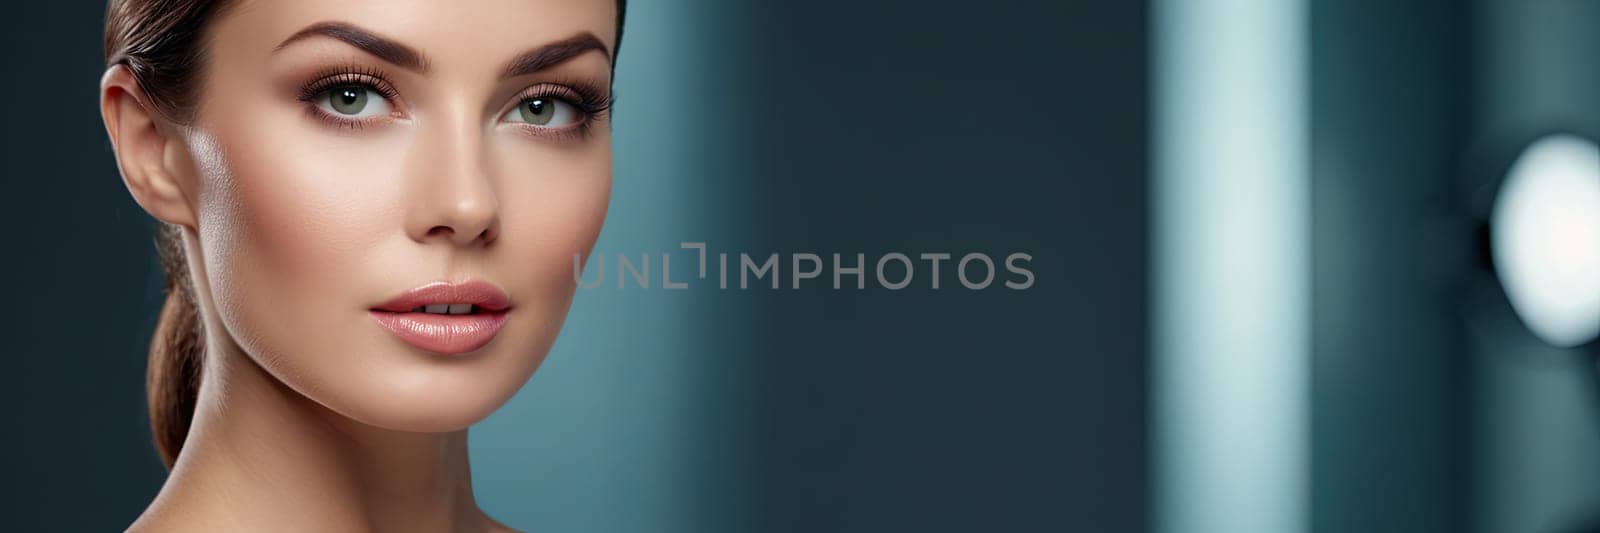 Close-up of a person’s lower face, showcasing clear complexion against a blue background. Image captures detail of skin texture, lips, used for skin care promotion. by Matiunina